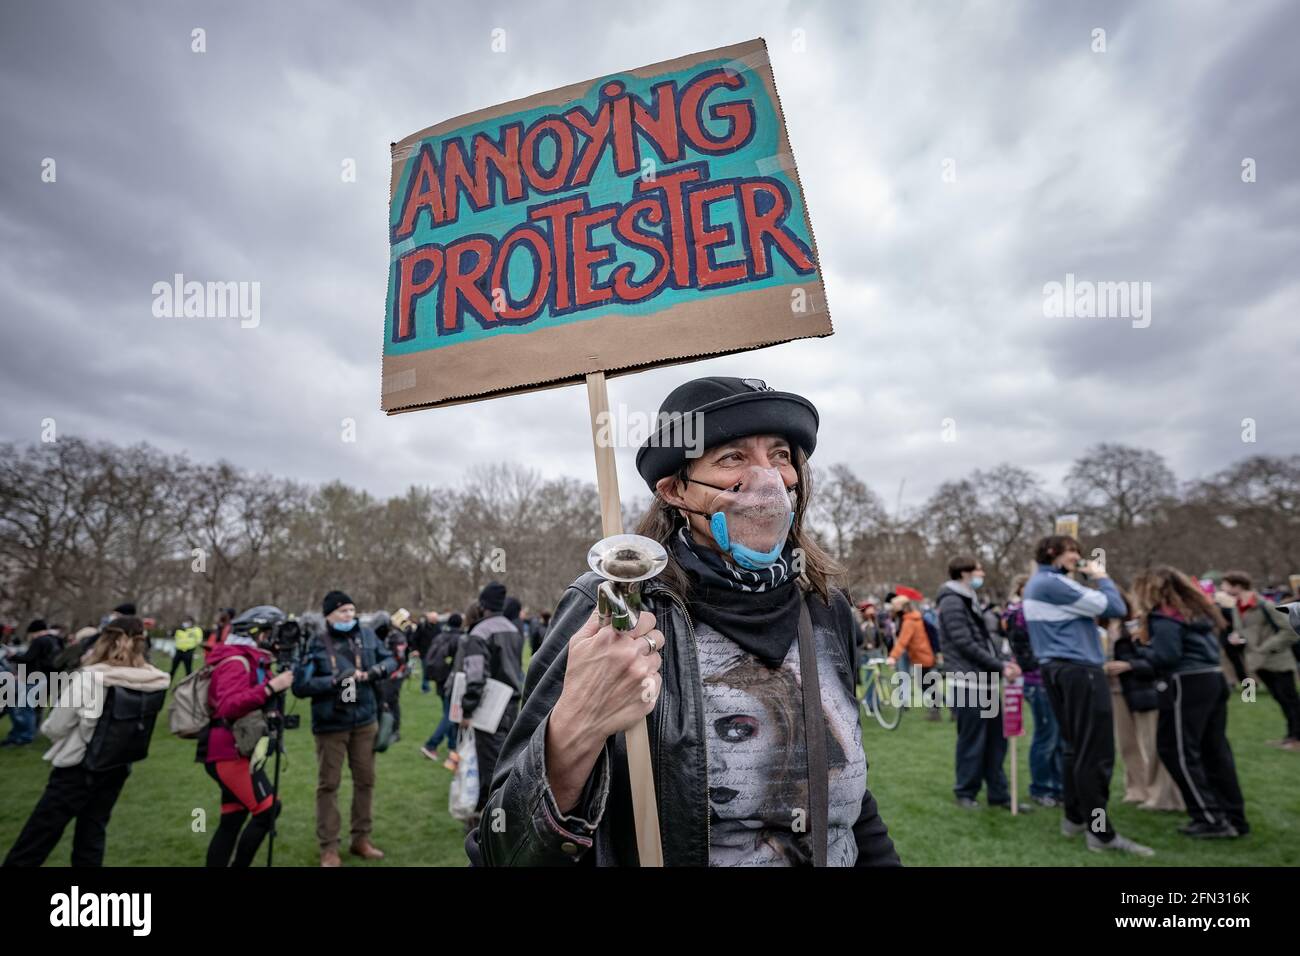 Kill The Bill Protest. Thousands of protesters gather in Hyde Park to demonstrate against a proposed ‘anti-protest’ policing crime bill. London, UK Stock Photo